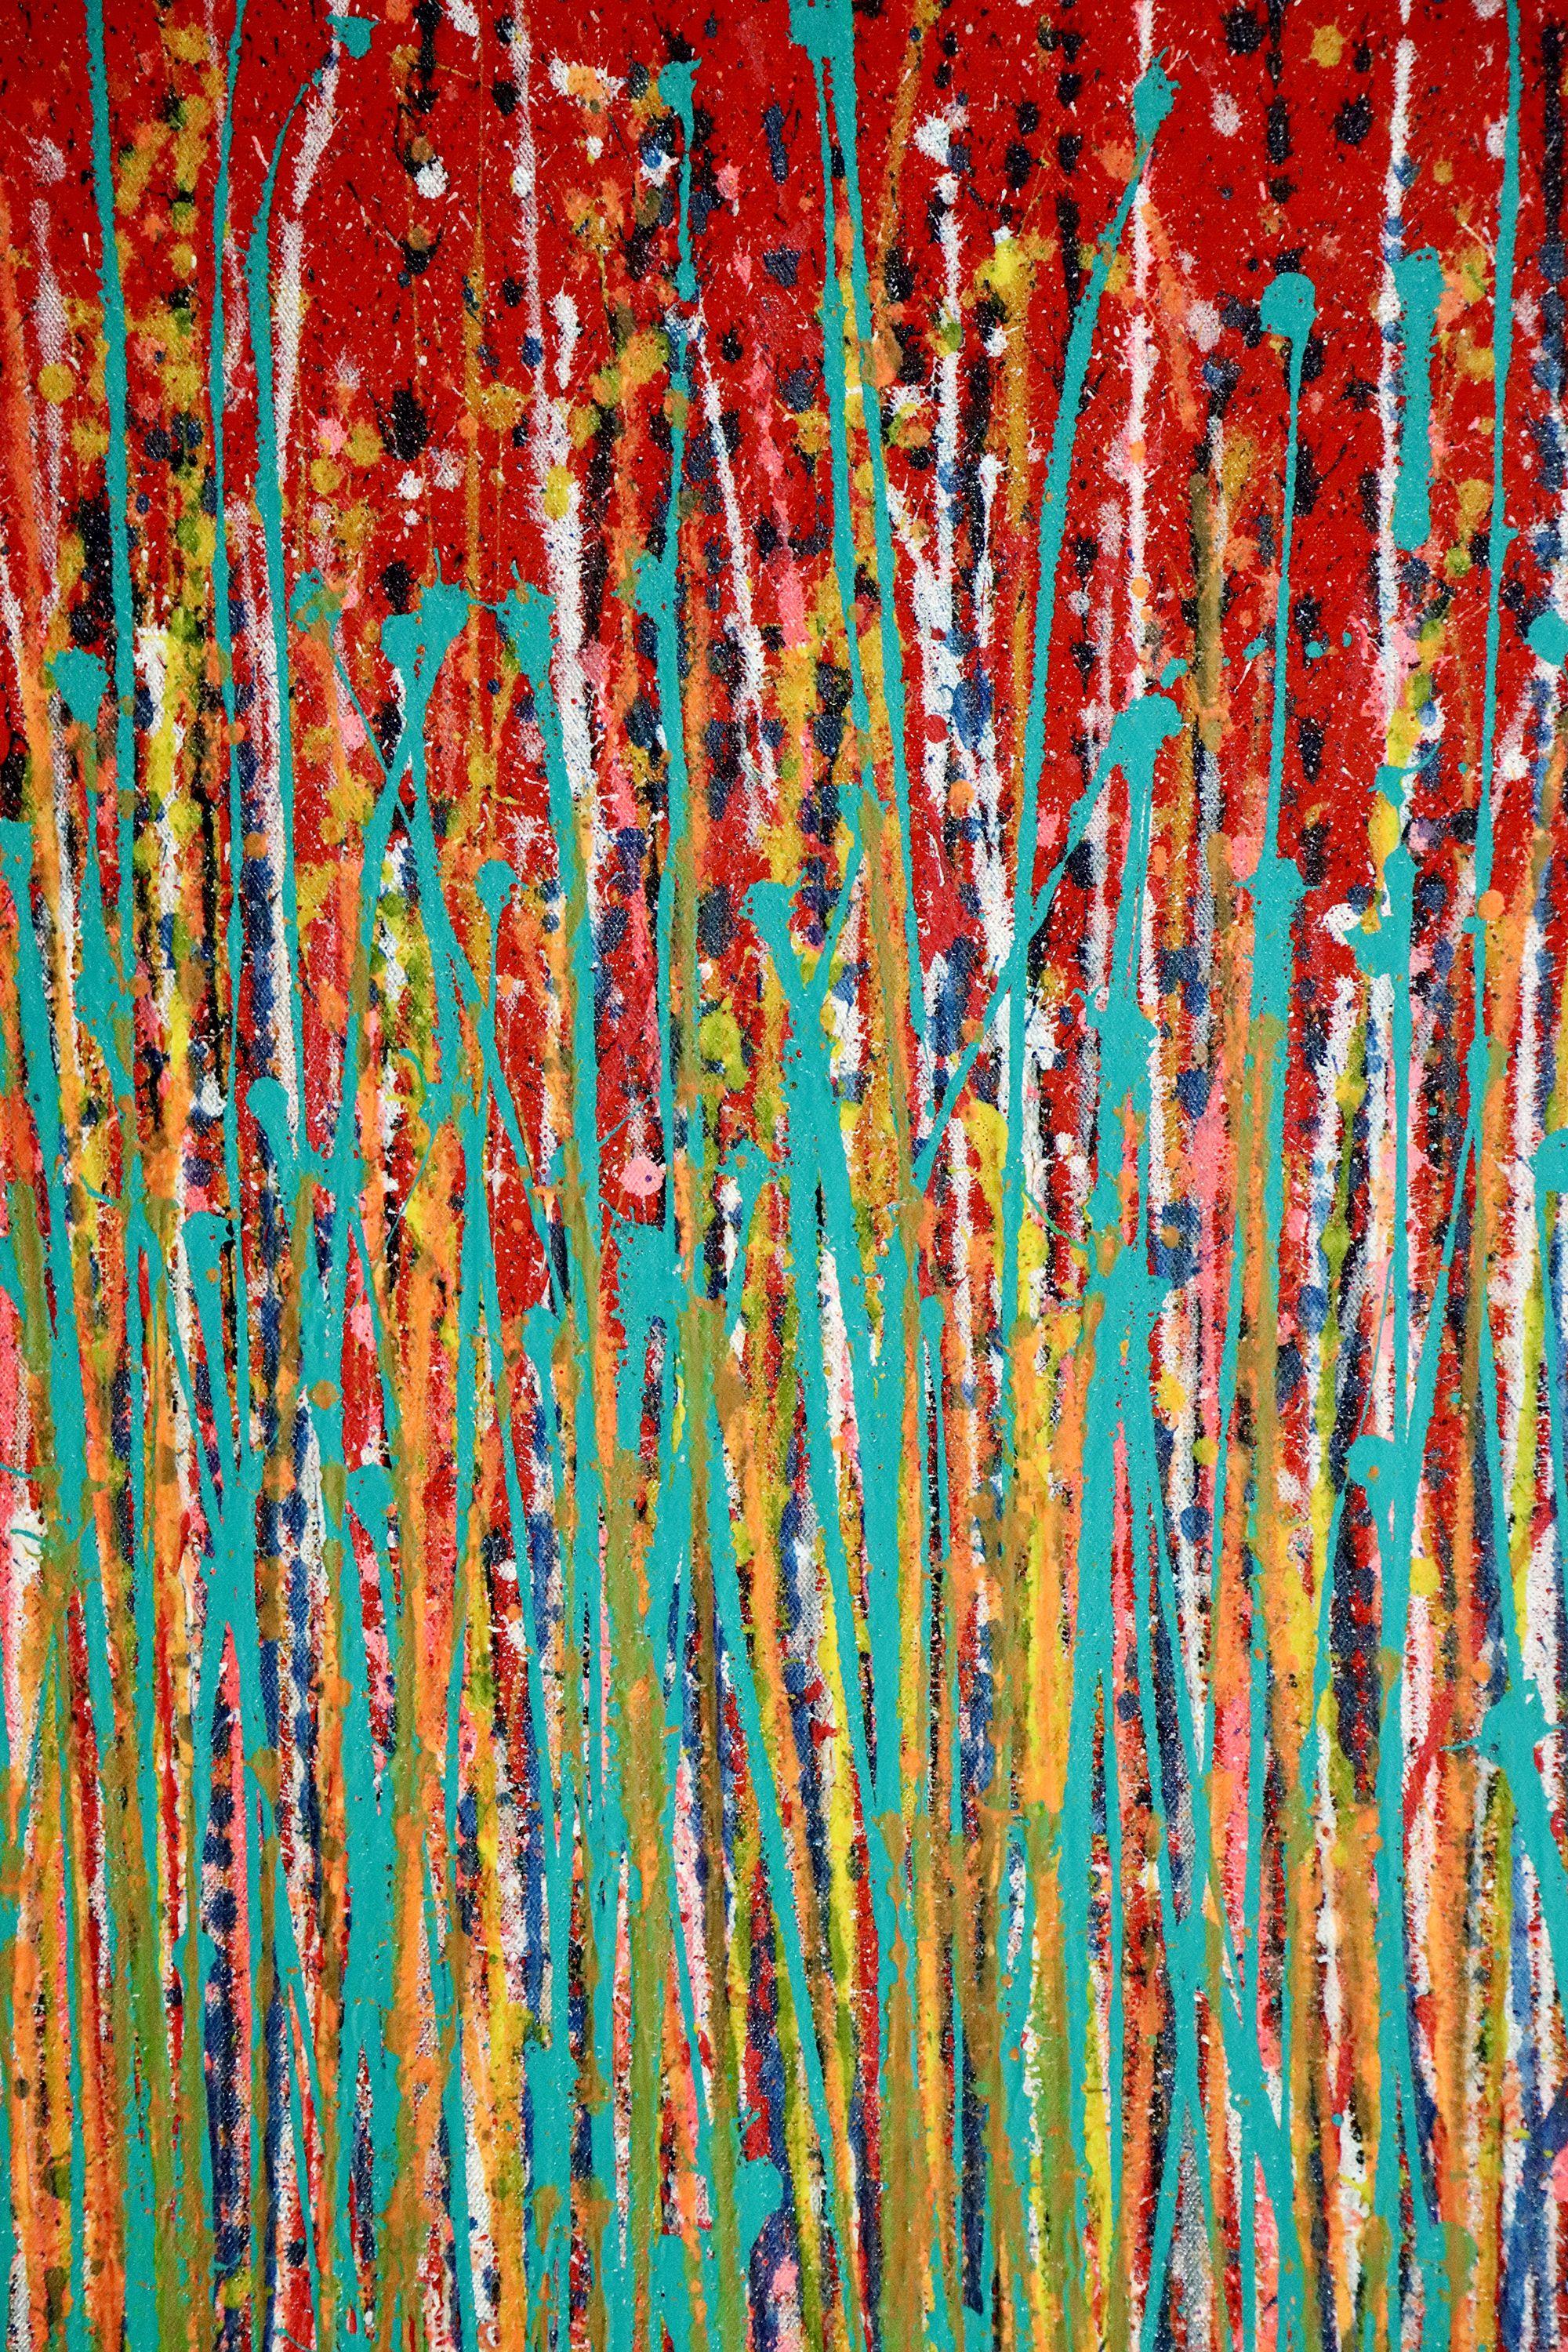 Expressive modern abstract, bold full of life, gloss and shimmer! inspired by nature, many shades and hues, red, indigo, blue, yellow, teal and orange combined with mica particles over vibrant red background. signed in front with gold ink.  Unframed